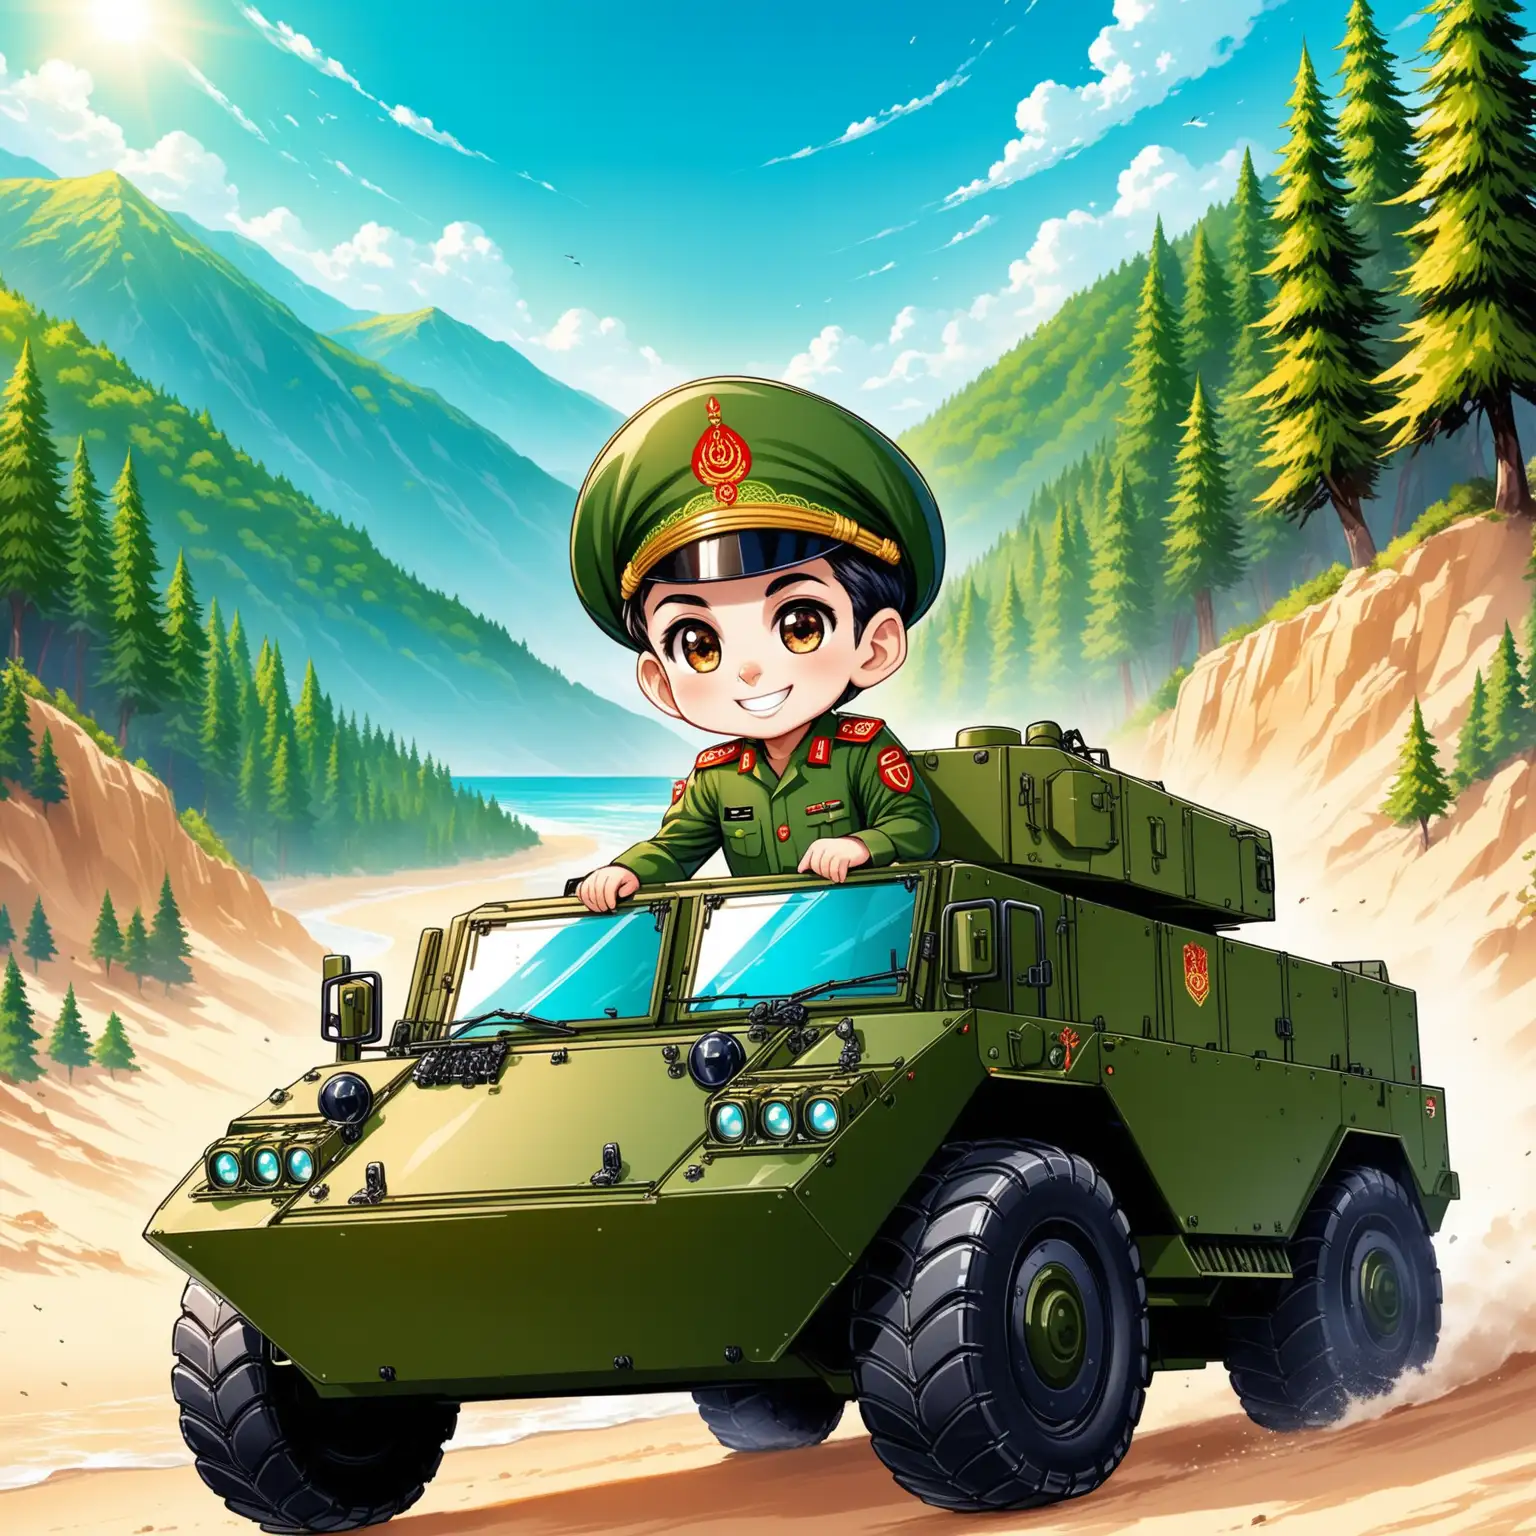 Character Persian 9 years old boy(racing military vehicle on mountain, smaller eyes, bigger nose, white skin, cute, smiling, clothes full of Persian designs, heavenly and warrior boy, IRGC commander).

Atmosphere modern super high-tech military vehicles around at a fantastic beach, forest.